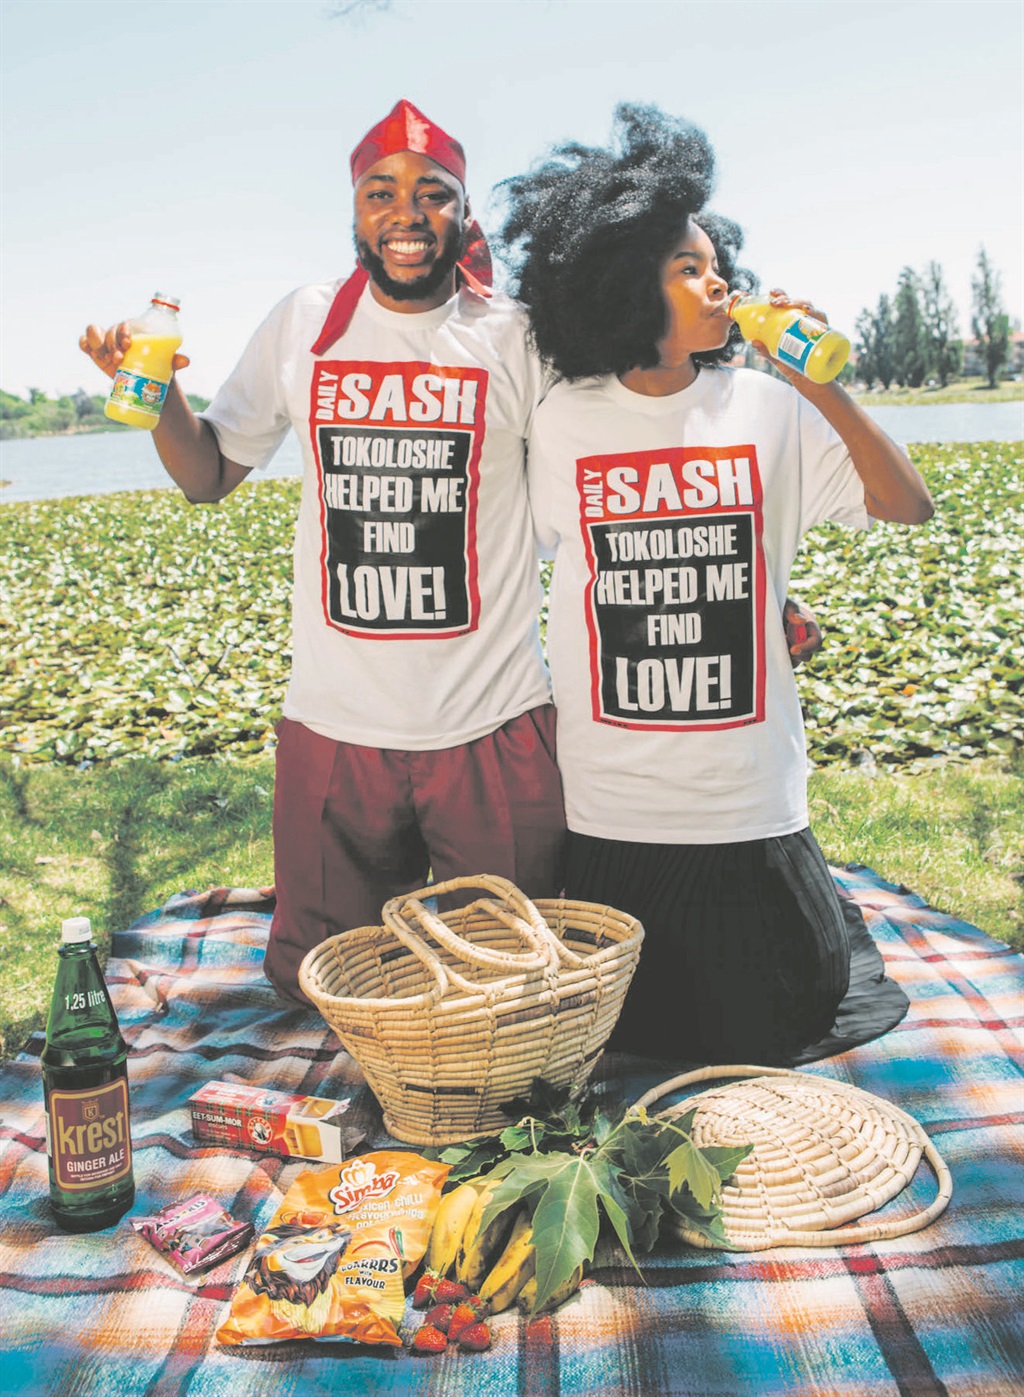 HAPPY HEARTS CLUB The T-shirts depict the Daily Sun’s iconic tokoloshe as a force for good 